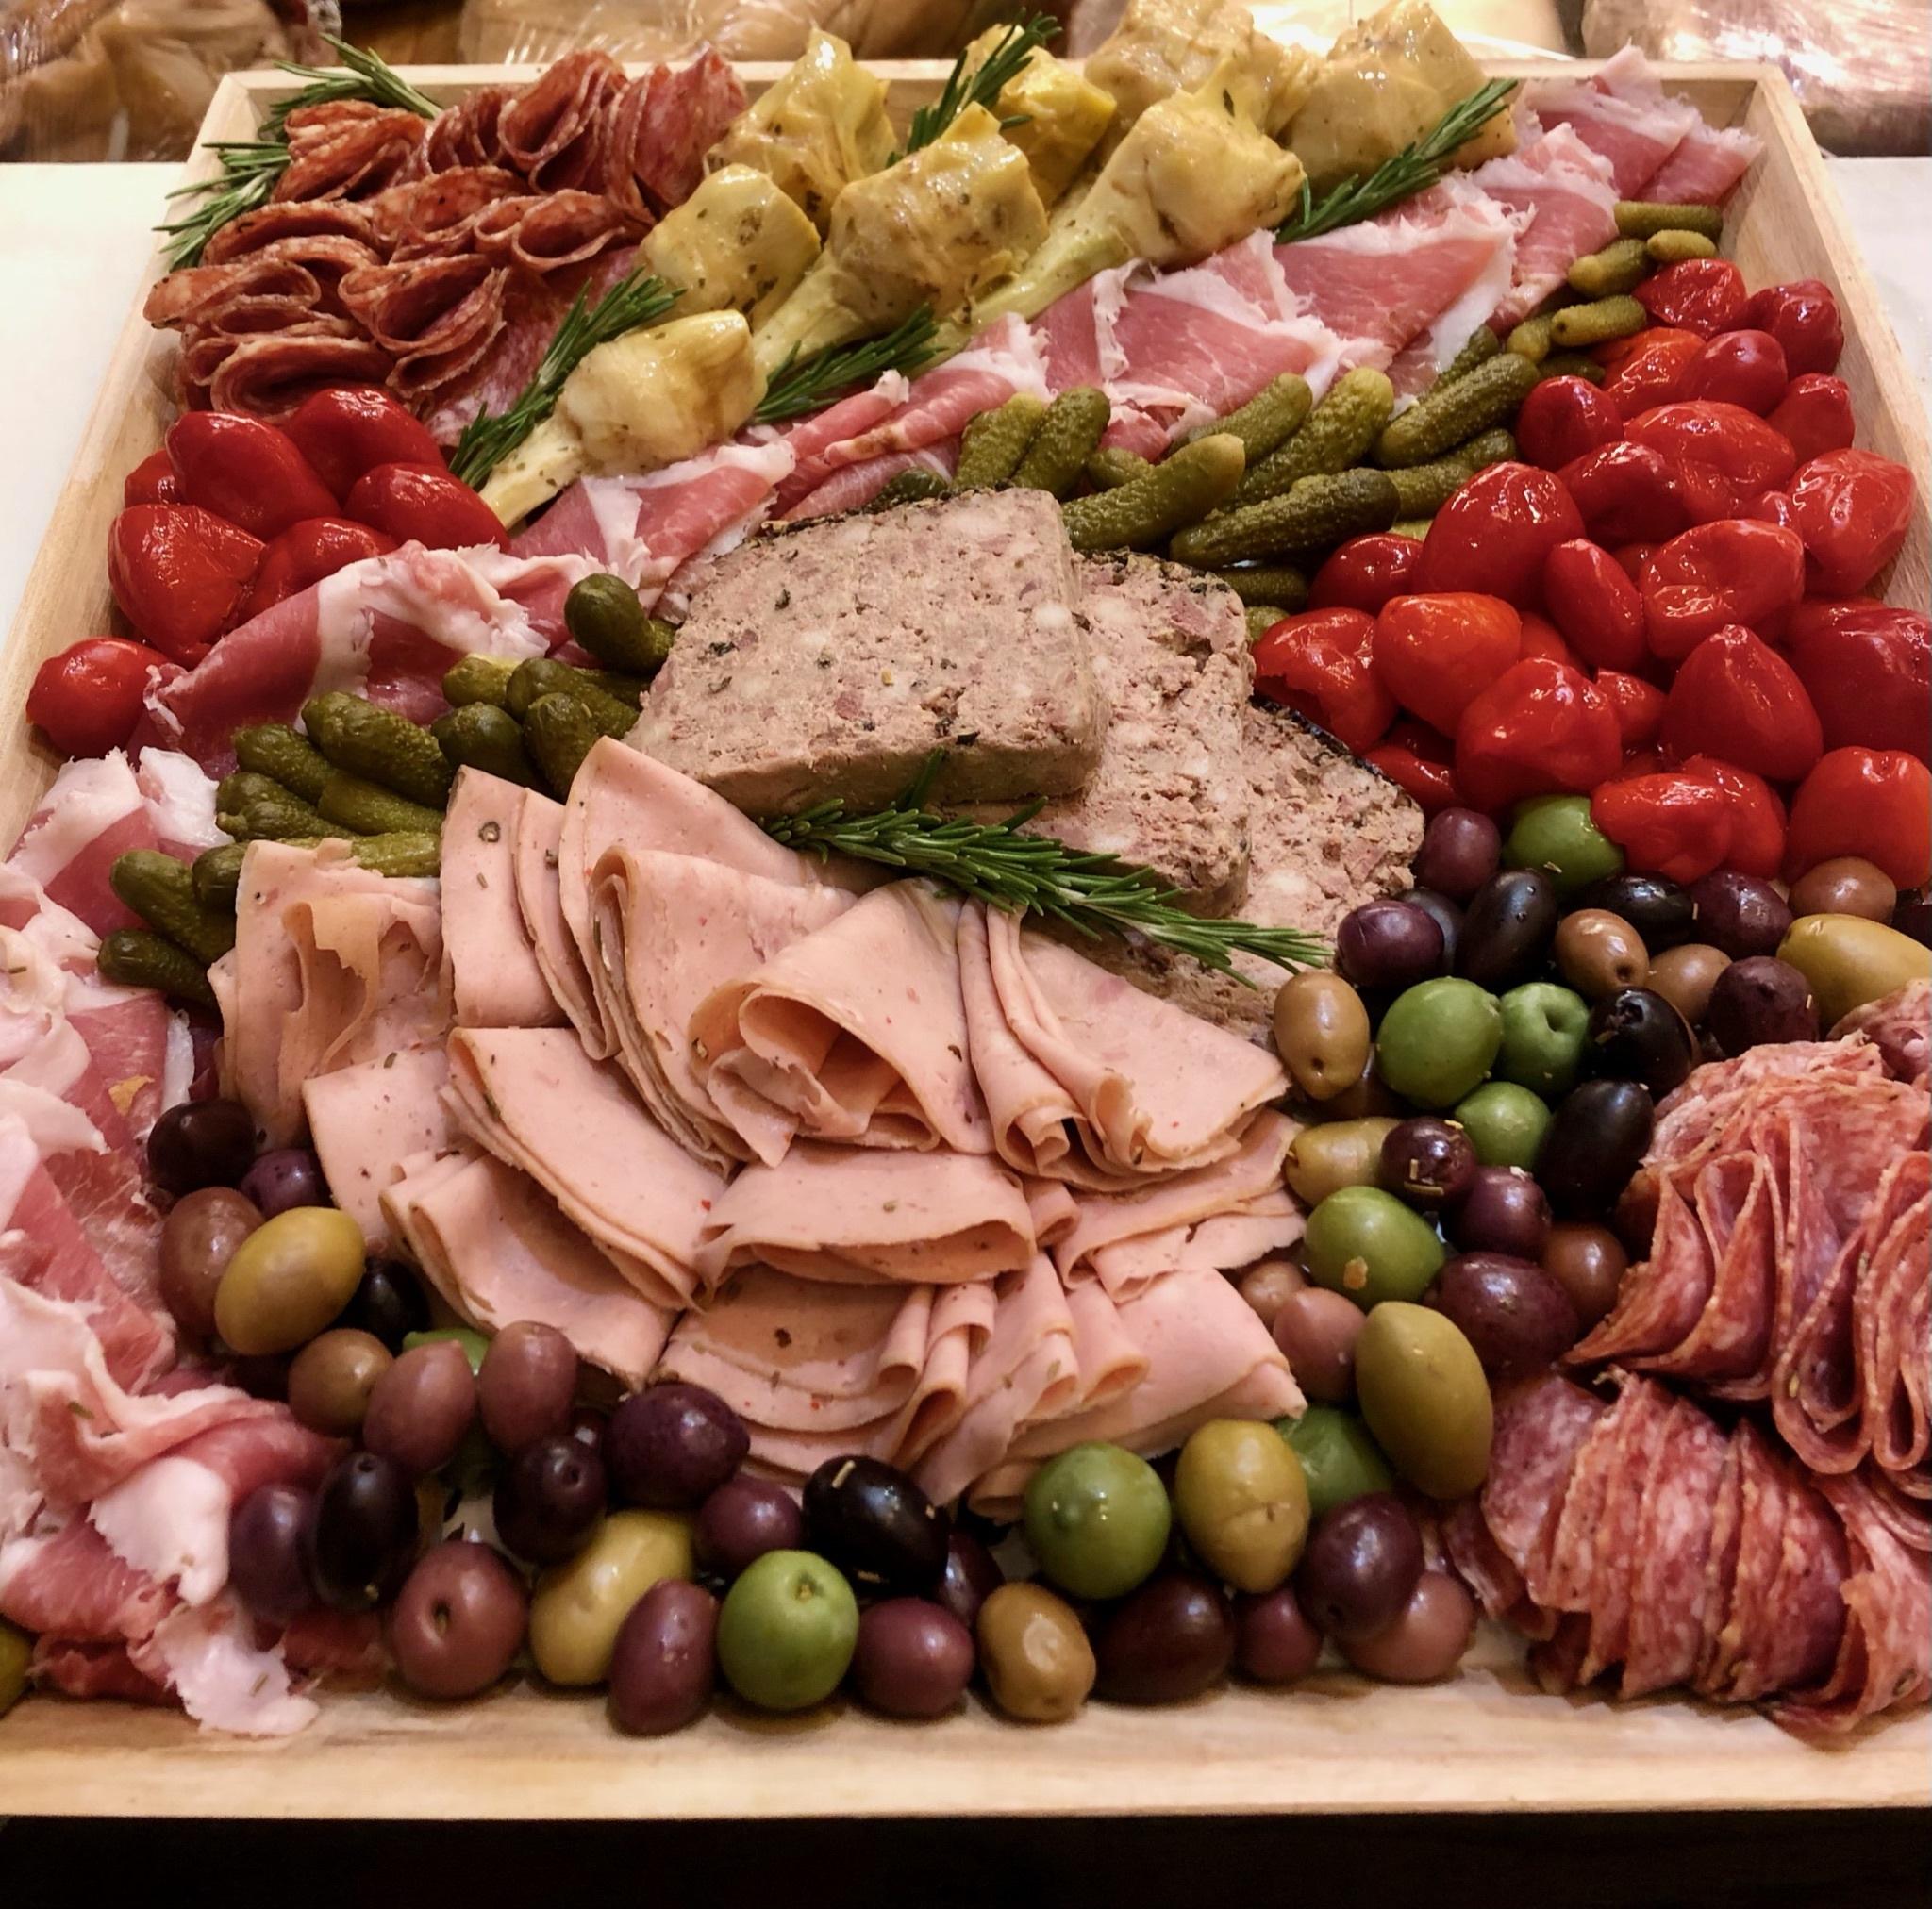 Image of the Charcuterie only meat platter. Assorted cured meats thinly sliced, thick cut pate served with brightly colored olive mixes and pickles.